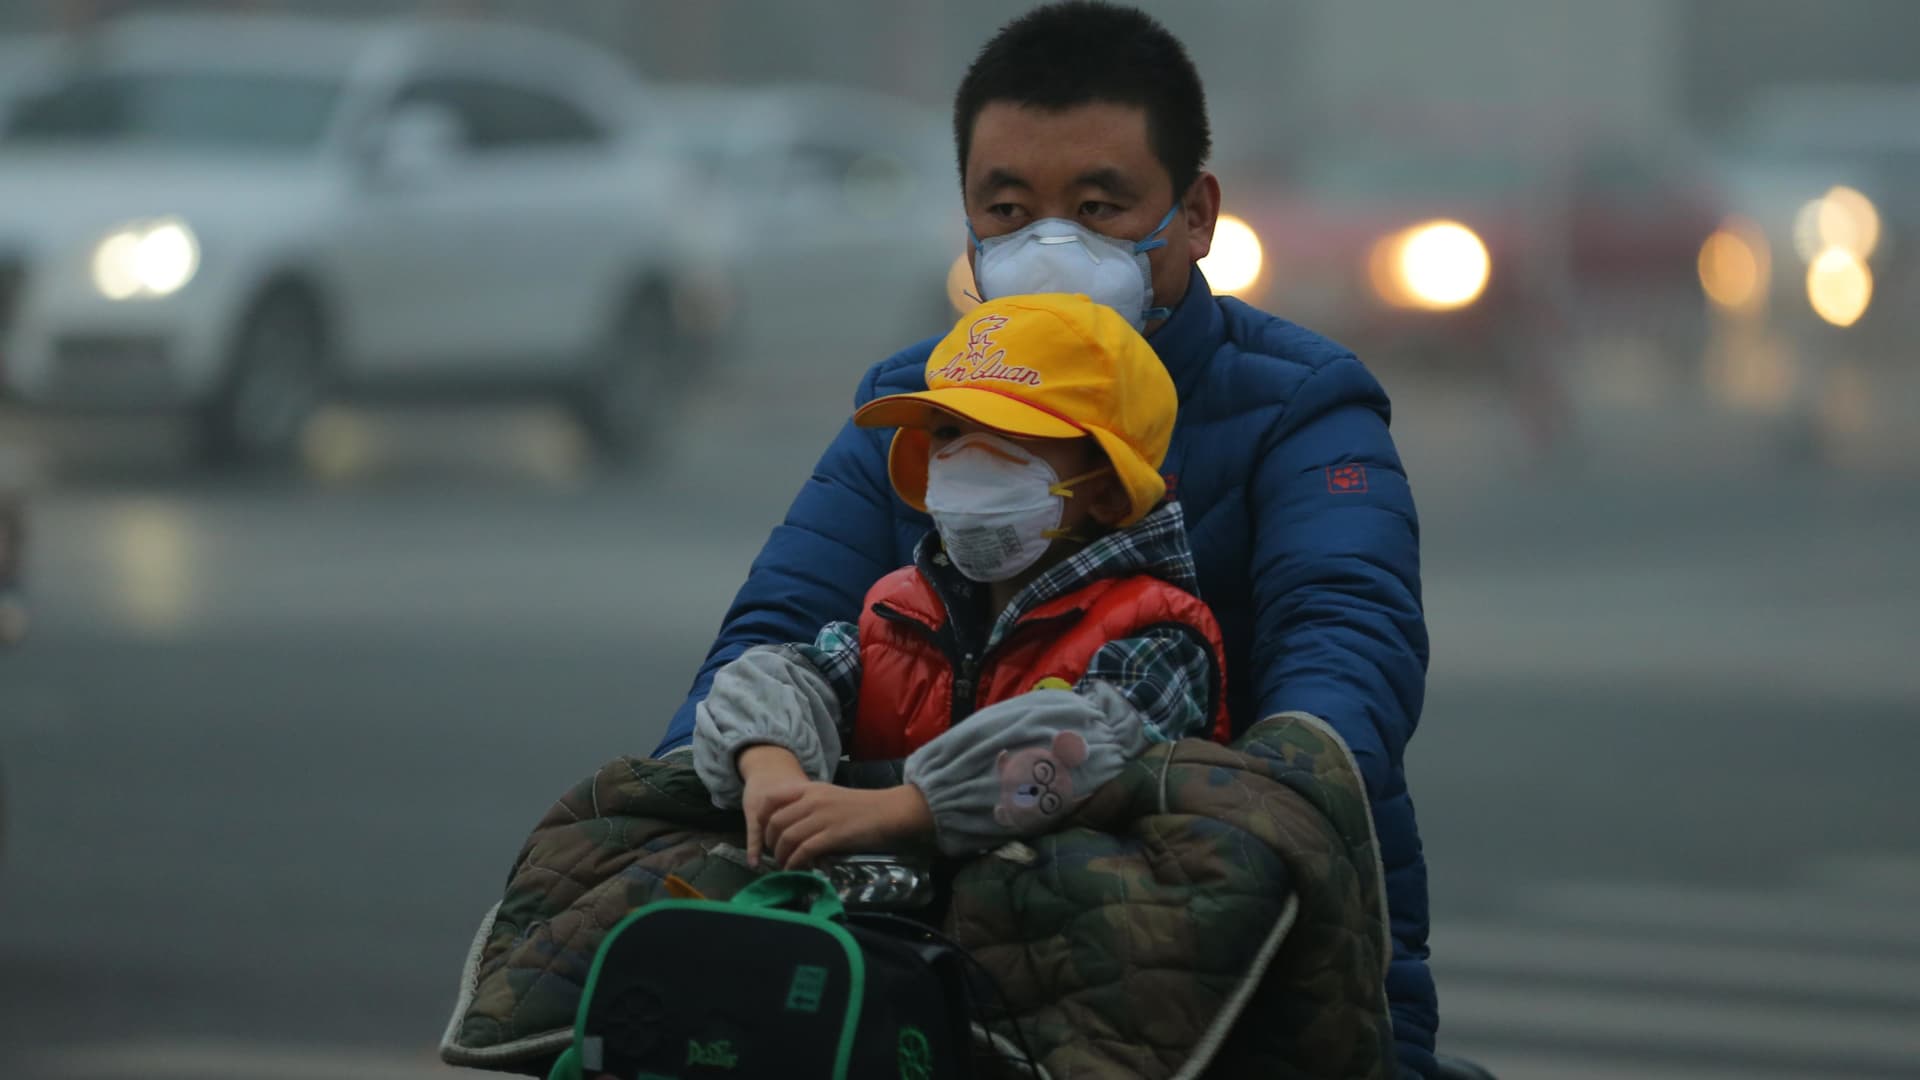 A man and a child wearing breathing masks are seen on an electric vehicle in smog on November 14, 2018 in Beijing, China.